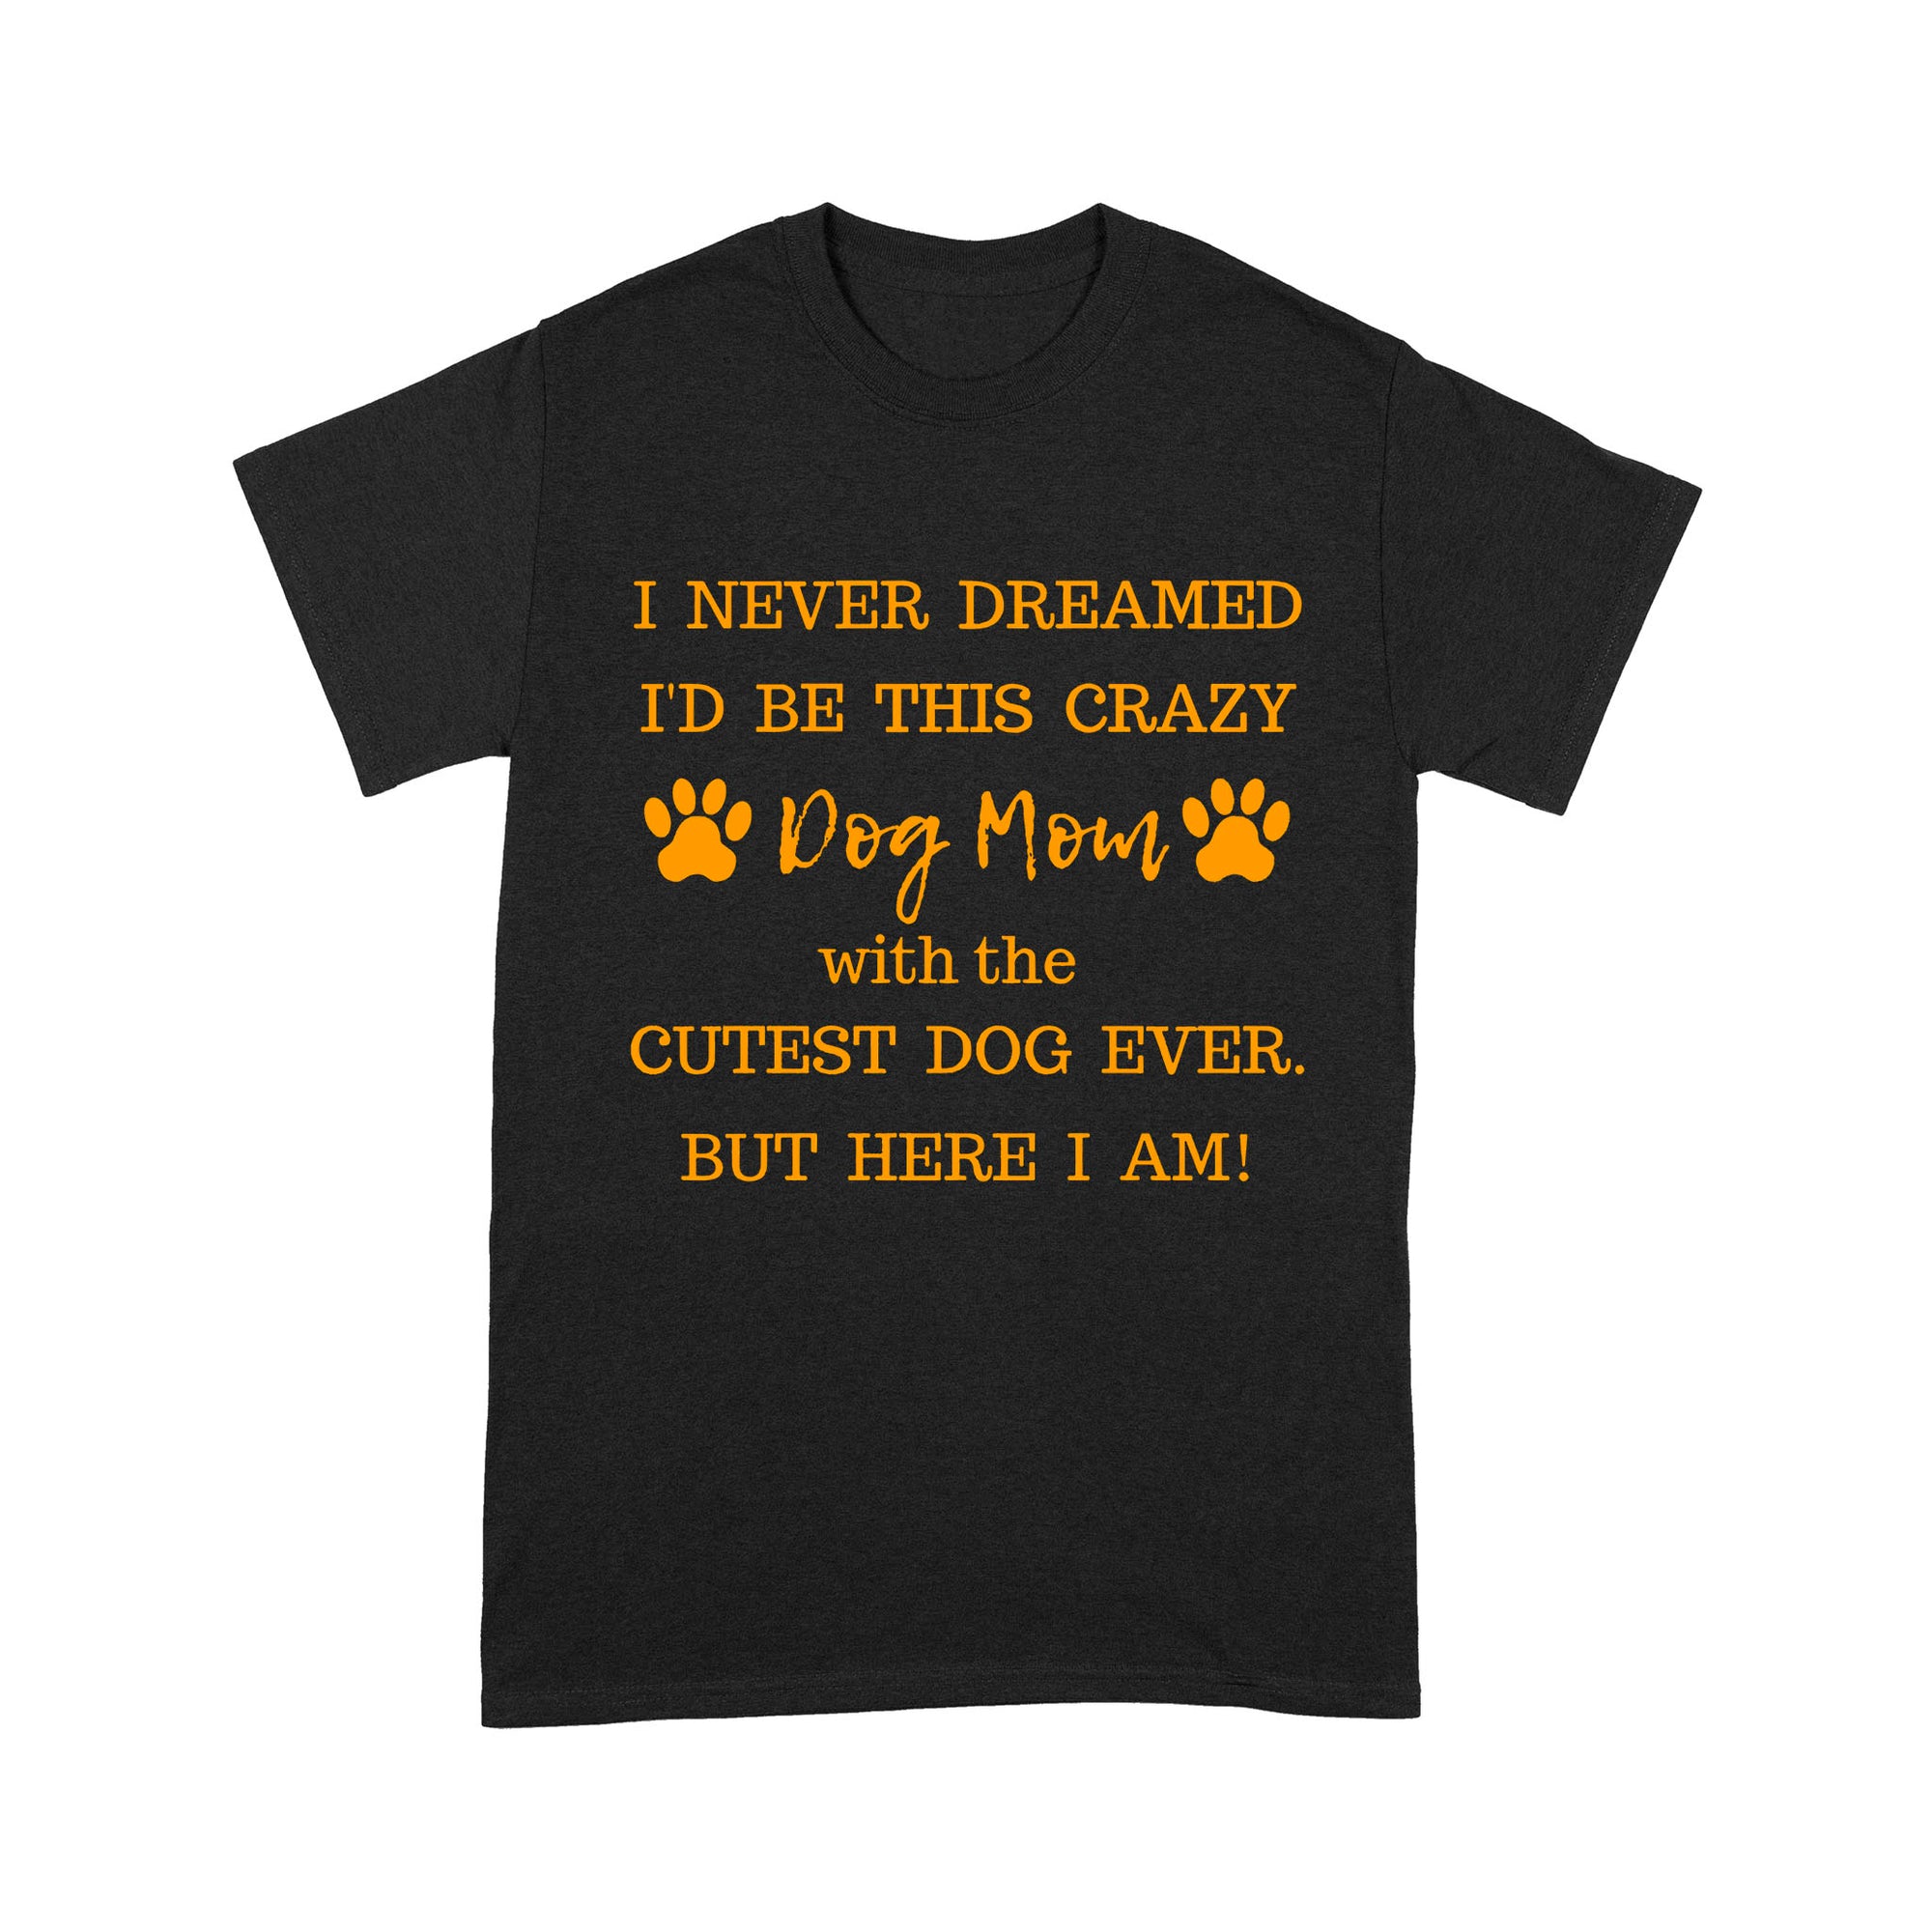 Premium T-shirt - I Never Dreamed I’d Be This Crazy Dog Mom With The Cutest Dogs Ever